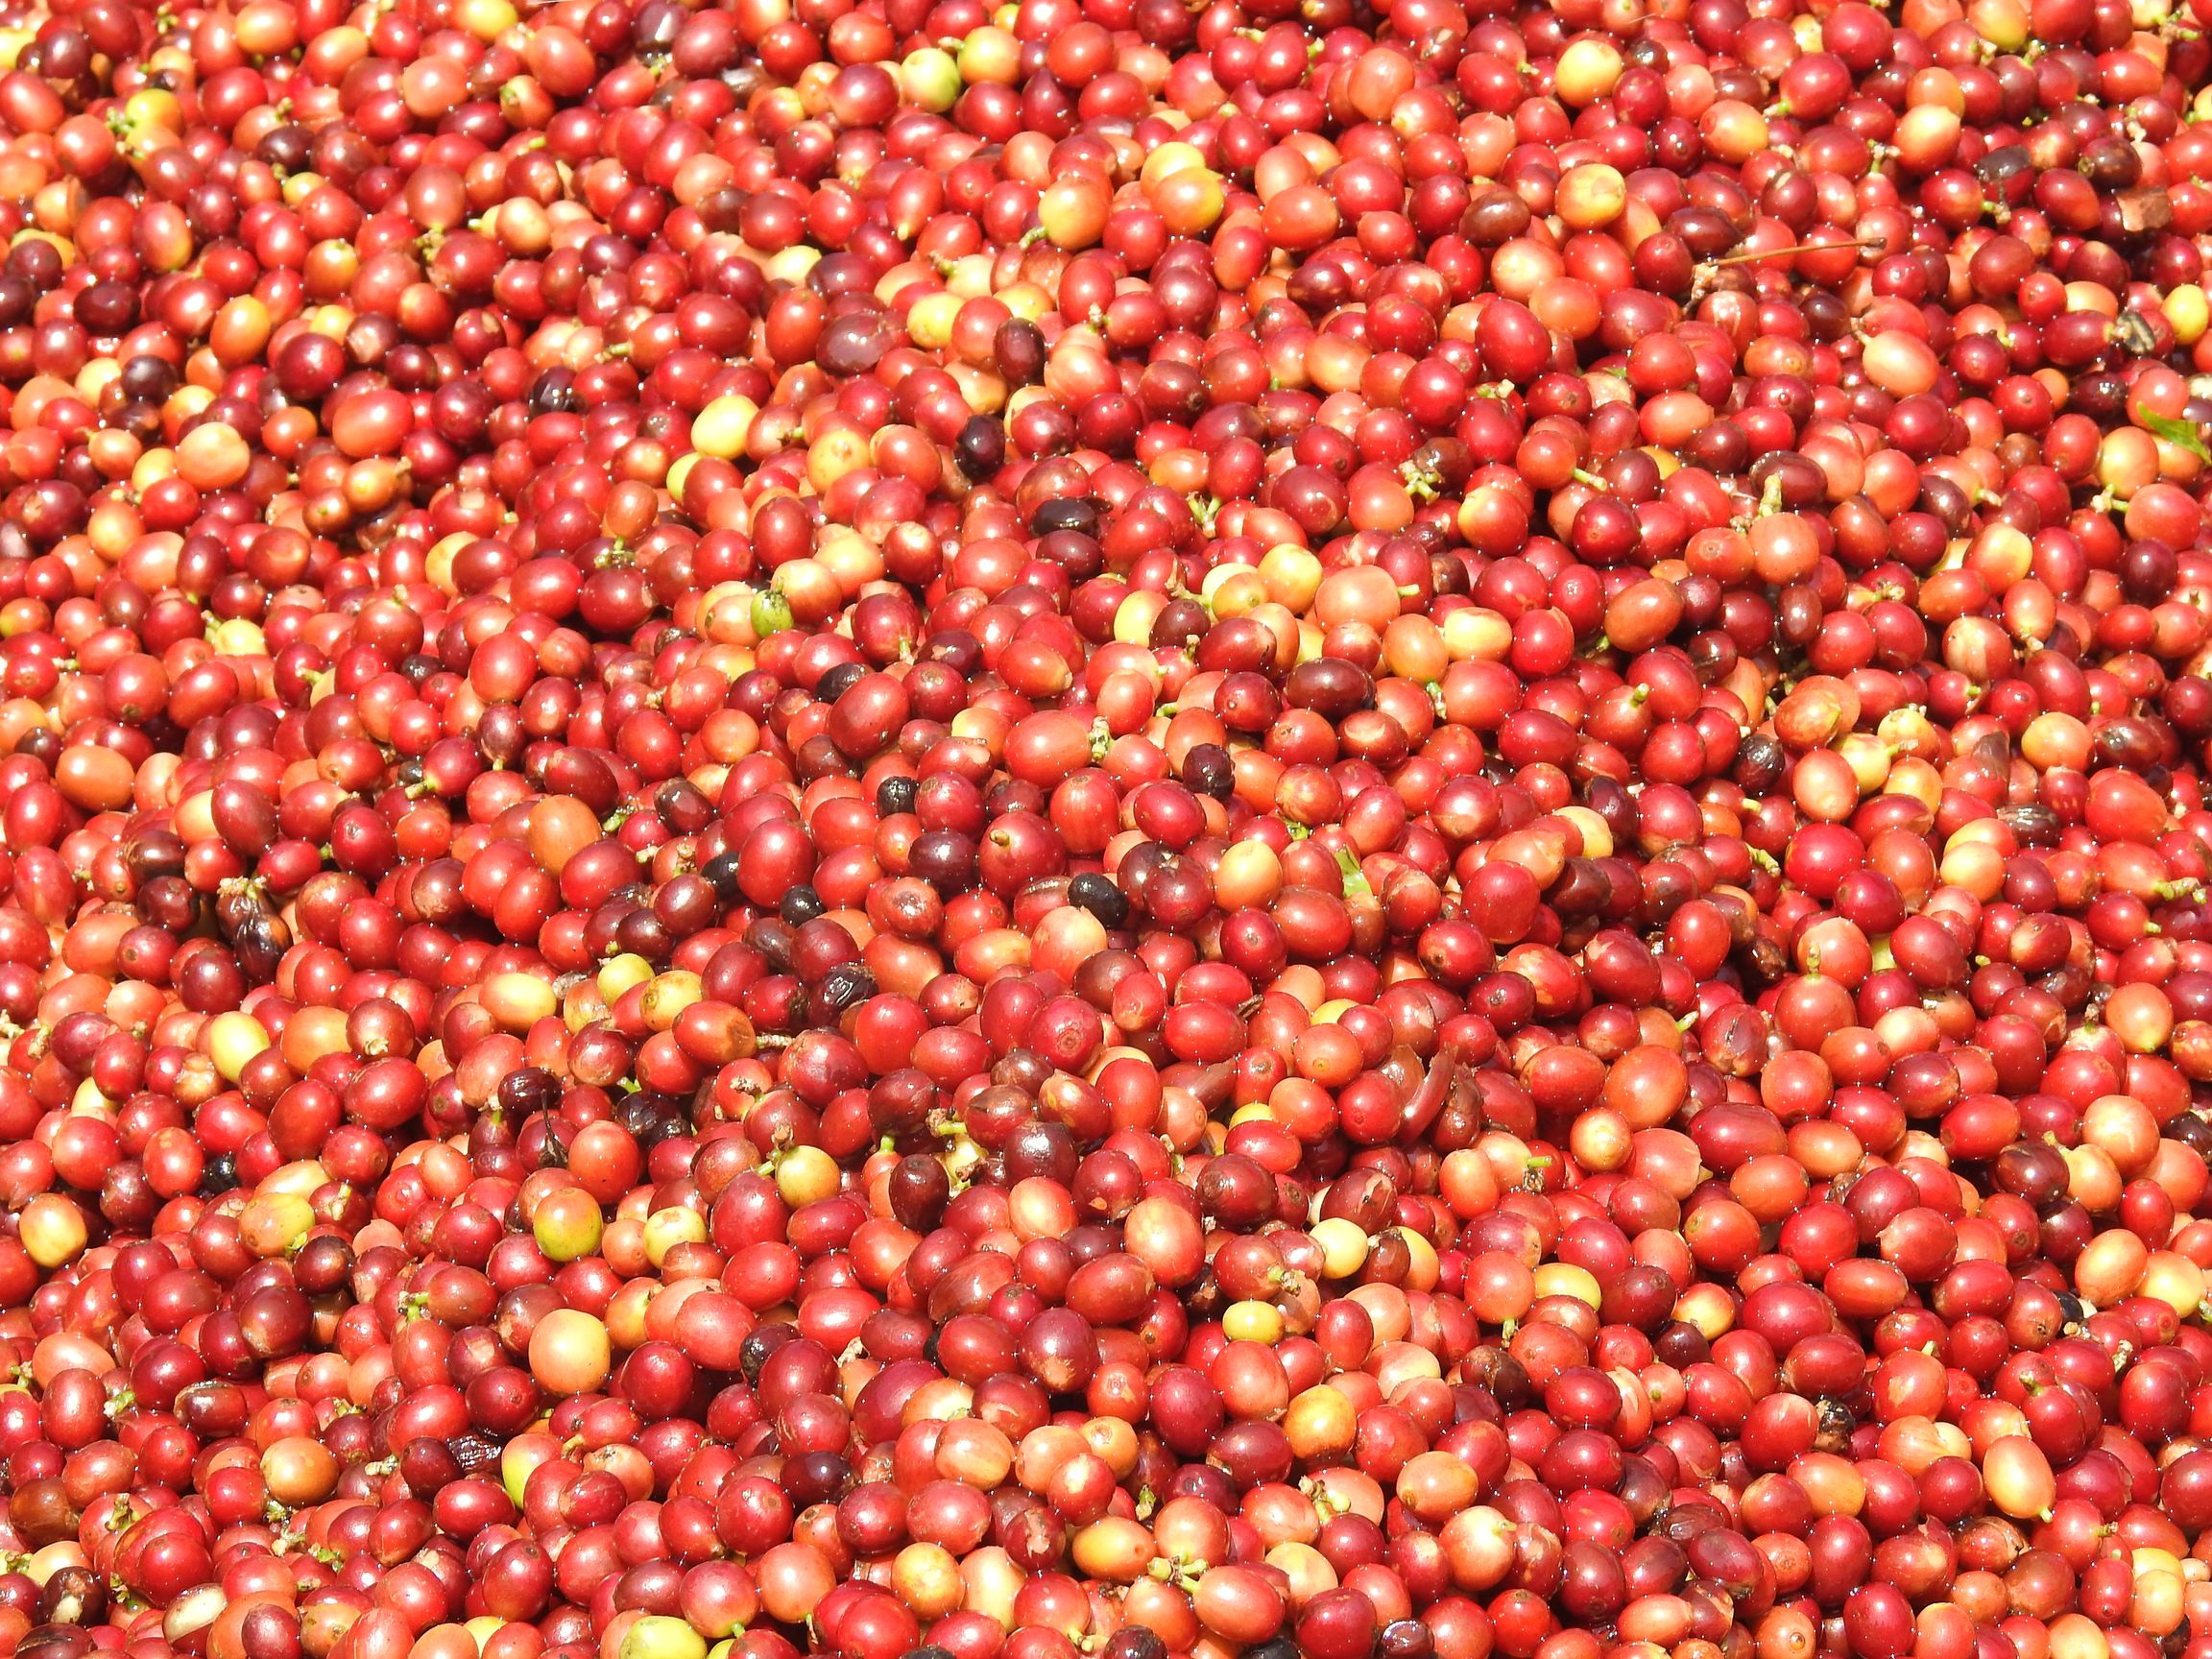 The ripened coffee beans ready for processing